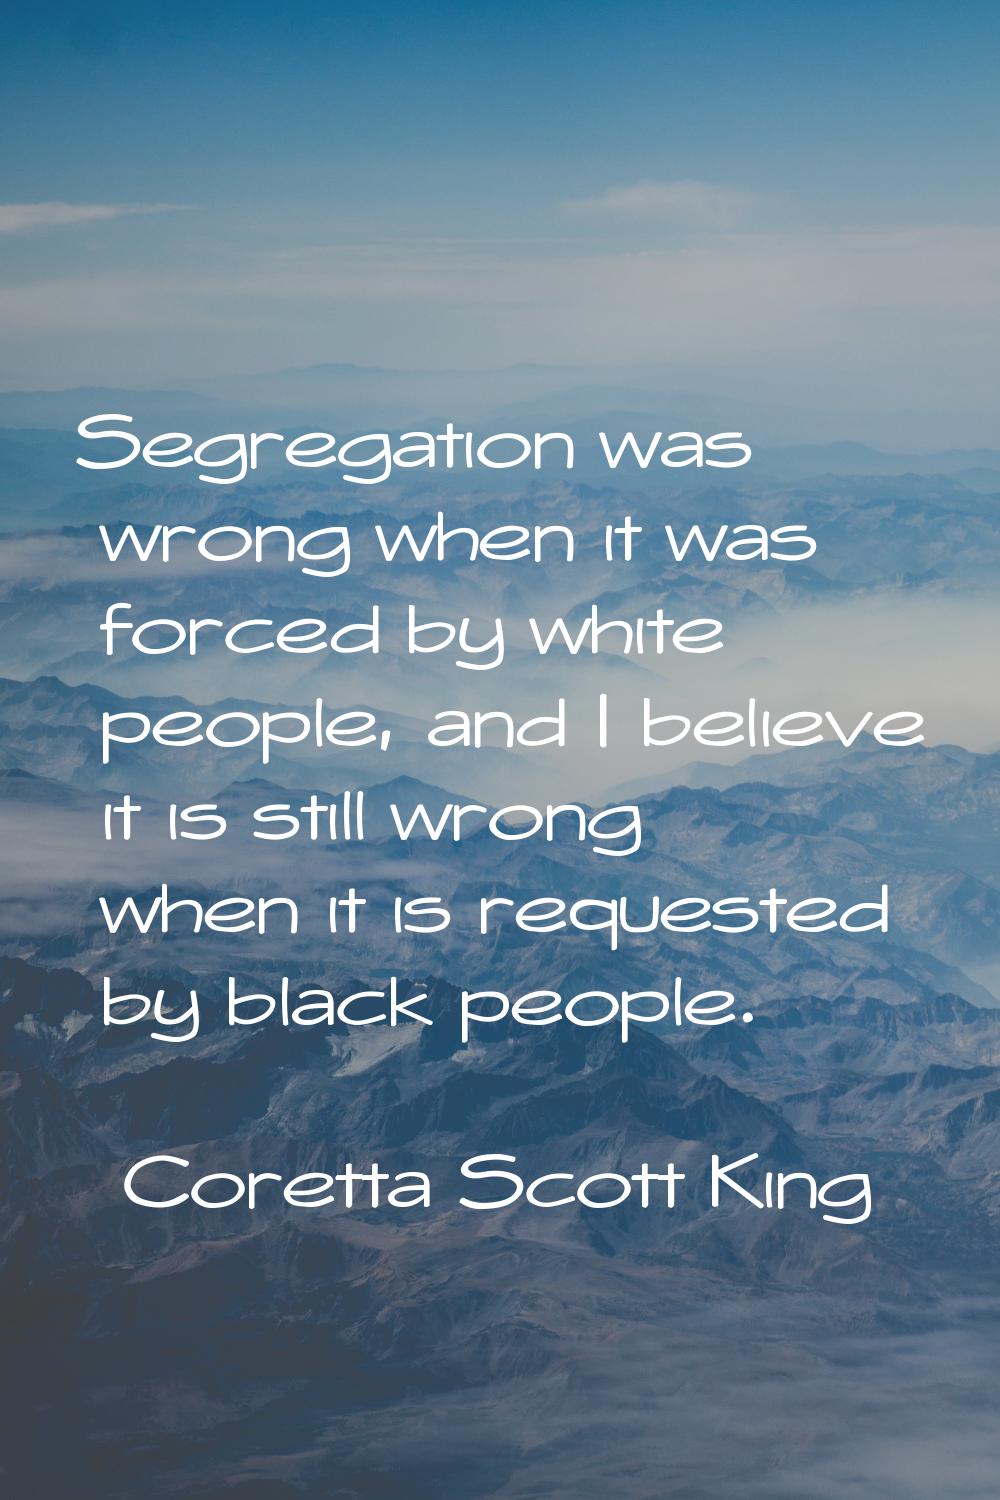 Segregation was wrong when it was forced by white people, and I believe it is still wrong when it i